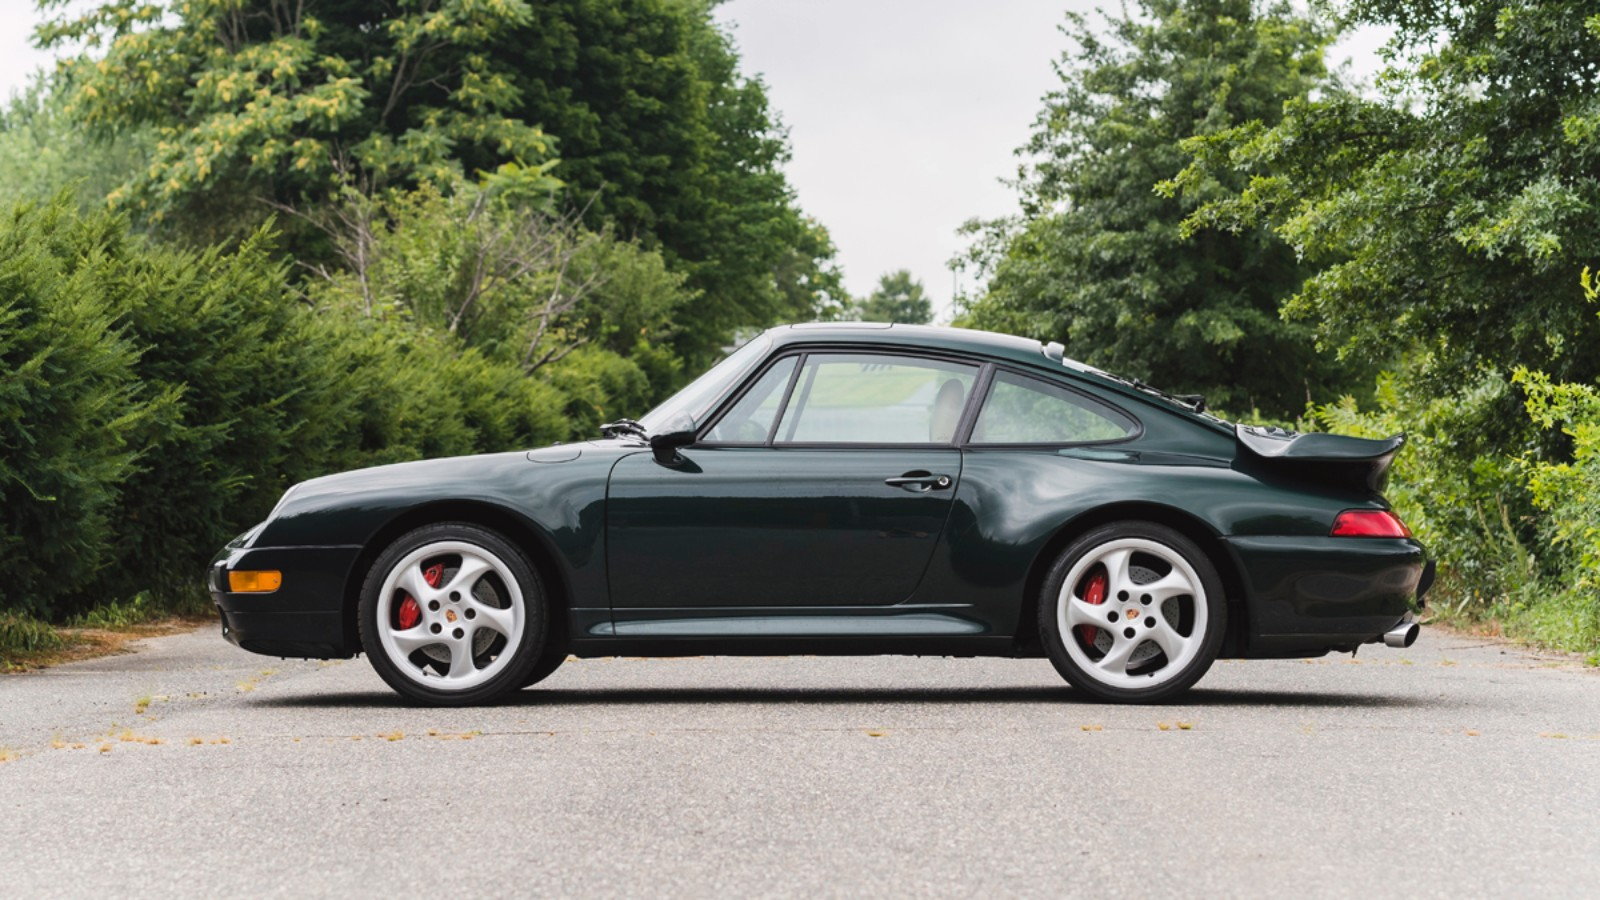 The 911 SC at the centre of a partnership with Aimé Leon Dore